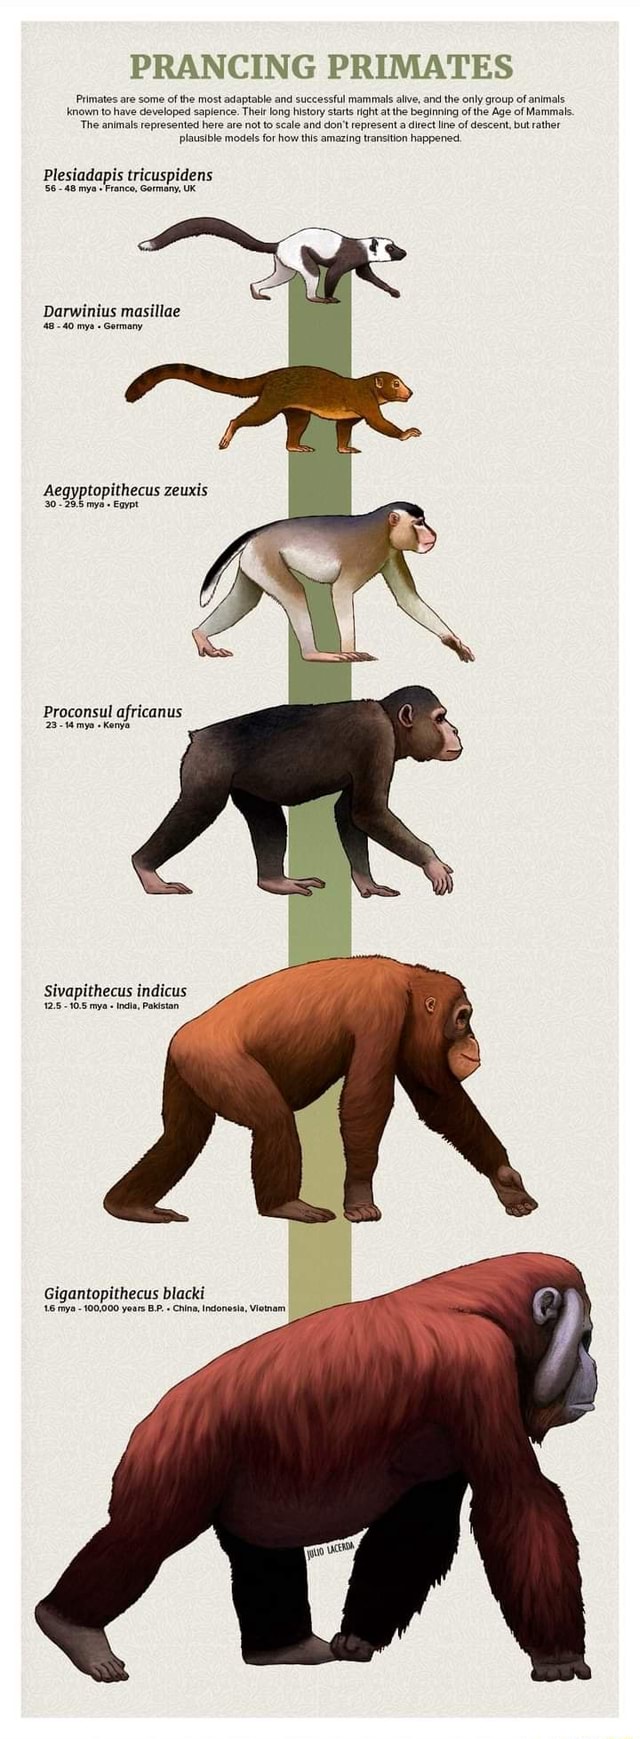 prancing-primates-primates-are-some-of-the-most-adaptable-and